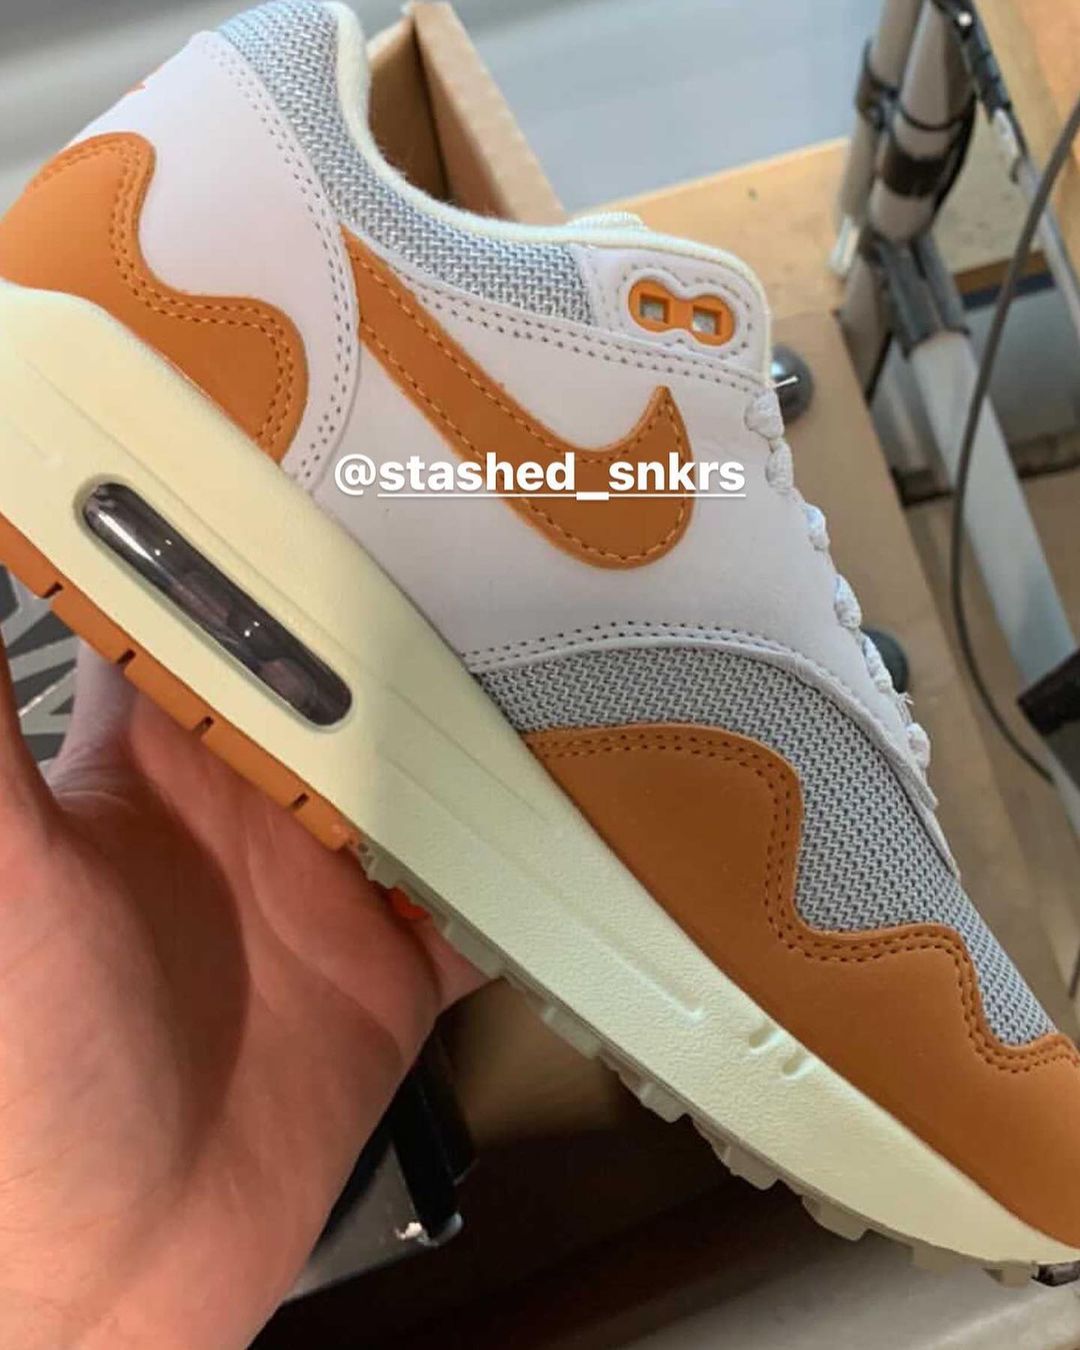 Patta Teases Upcoming Nike Air Max 1 “The Wave” Collab